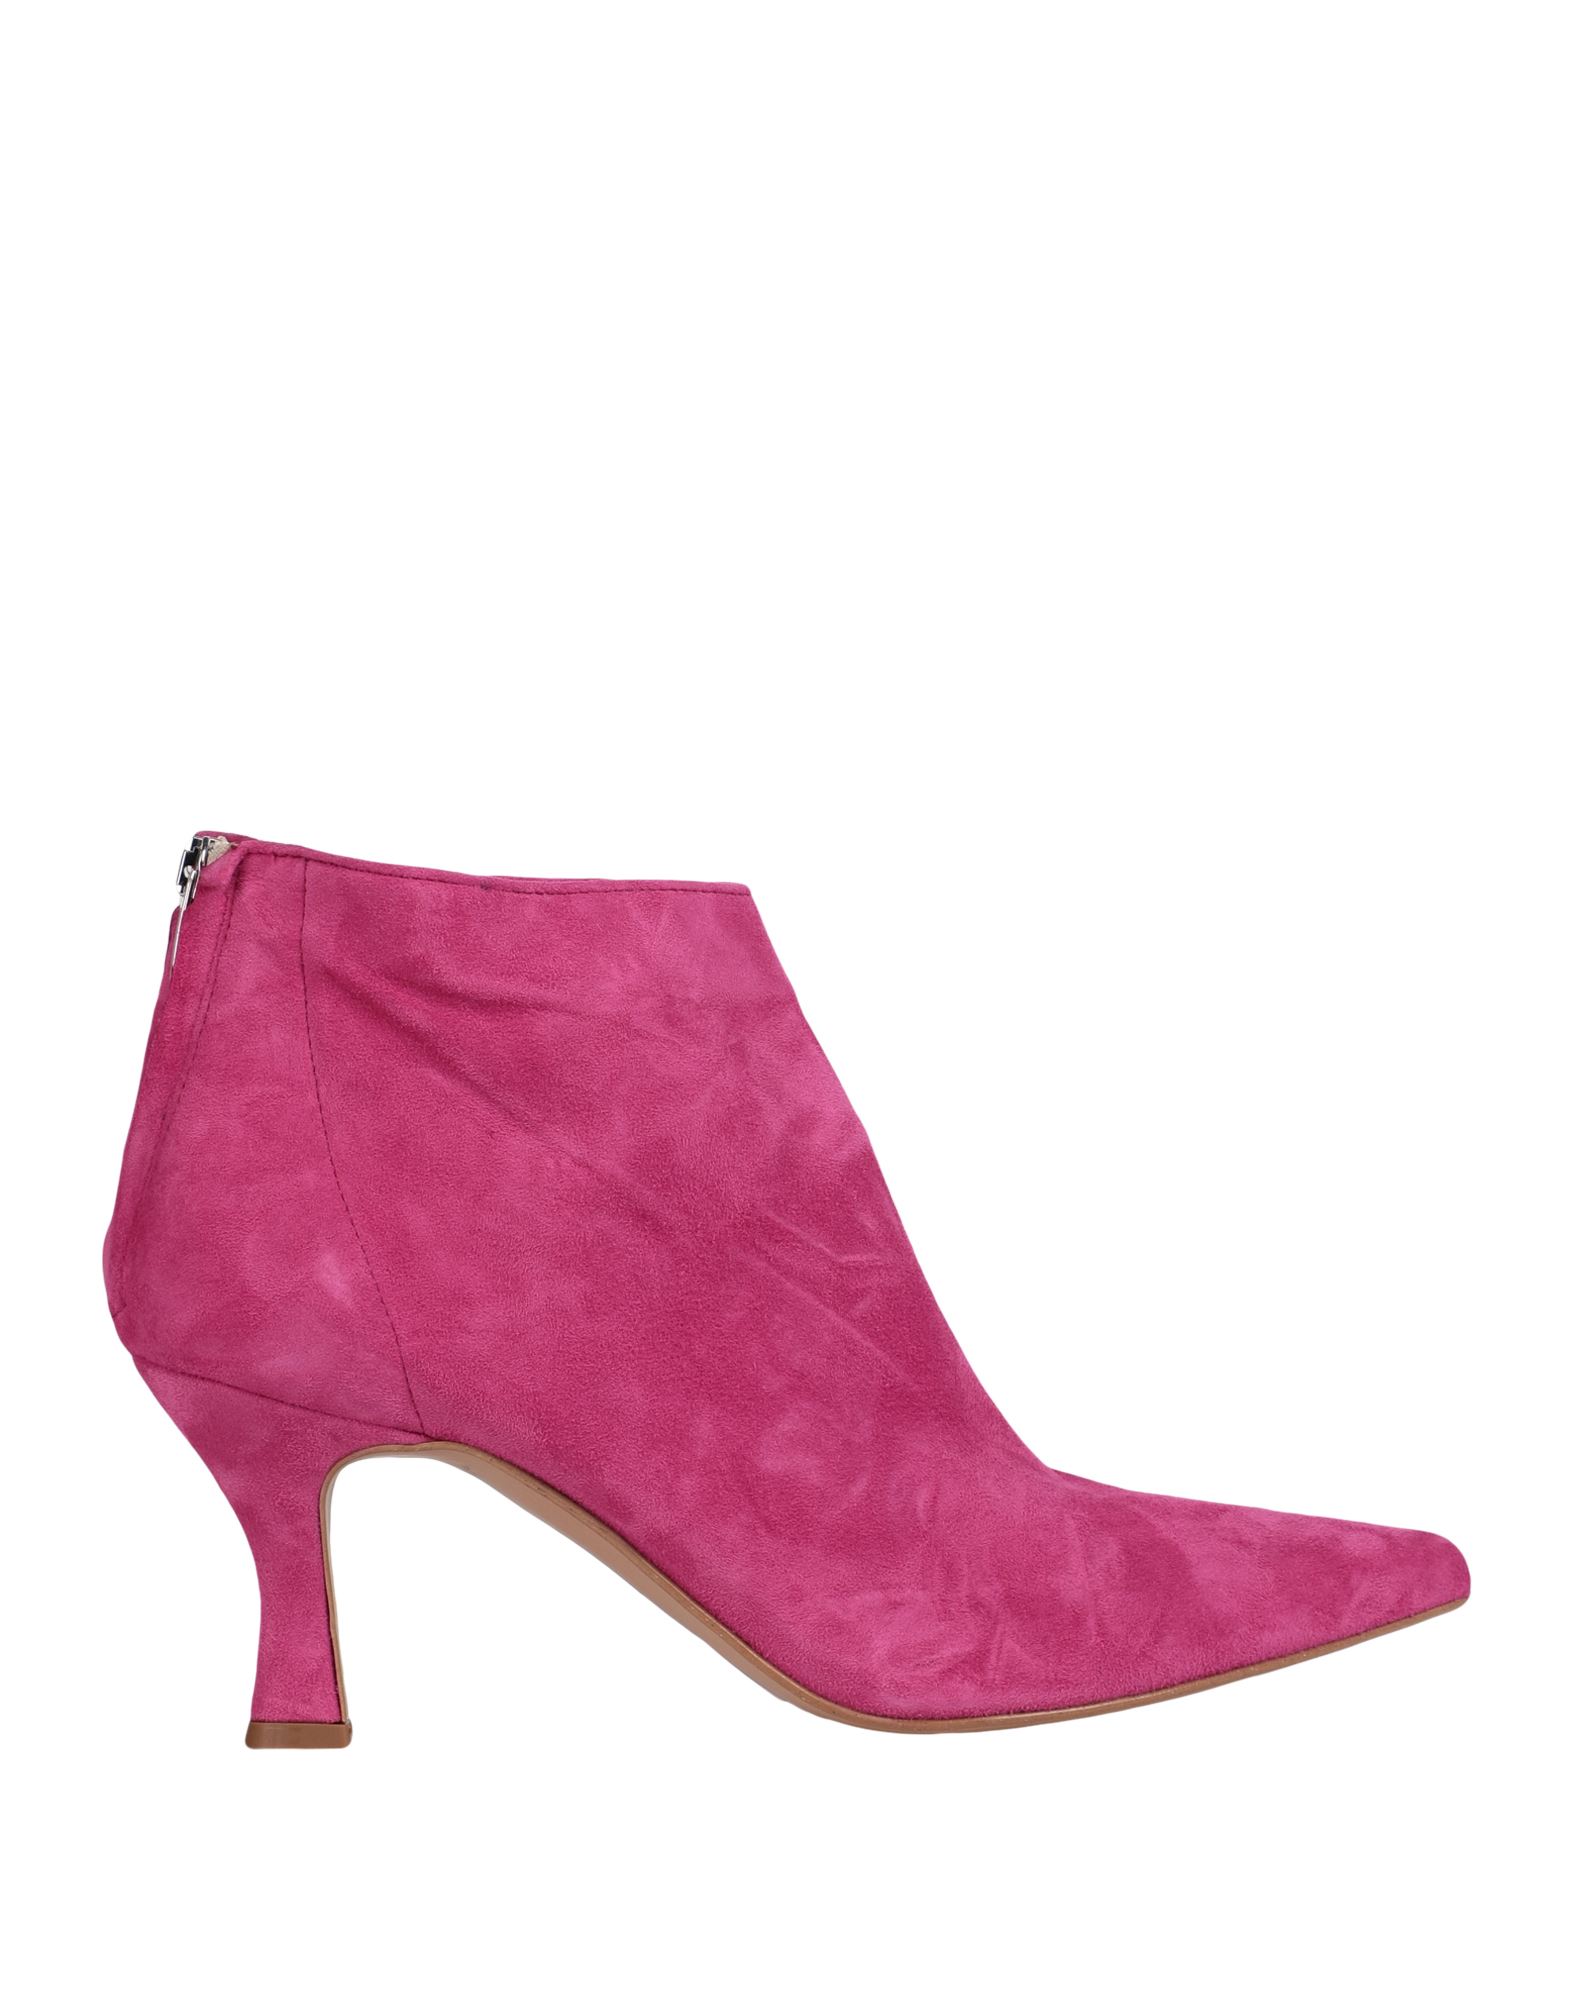 Ovye' By Cristina Lucchi Woman Ankle Boots Fuchsia Size 9 Soft Leather In Pink